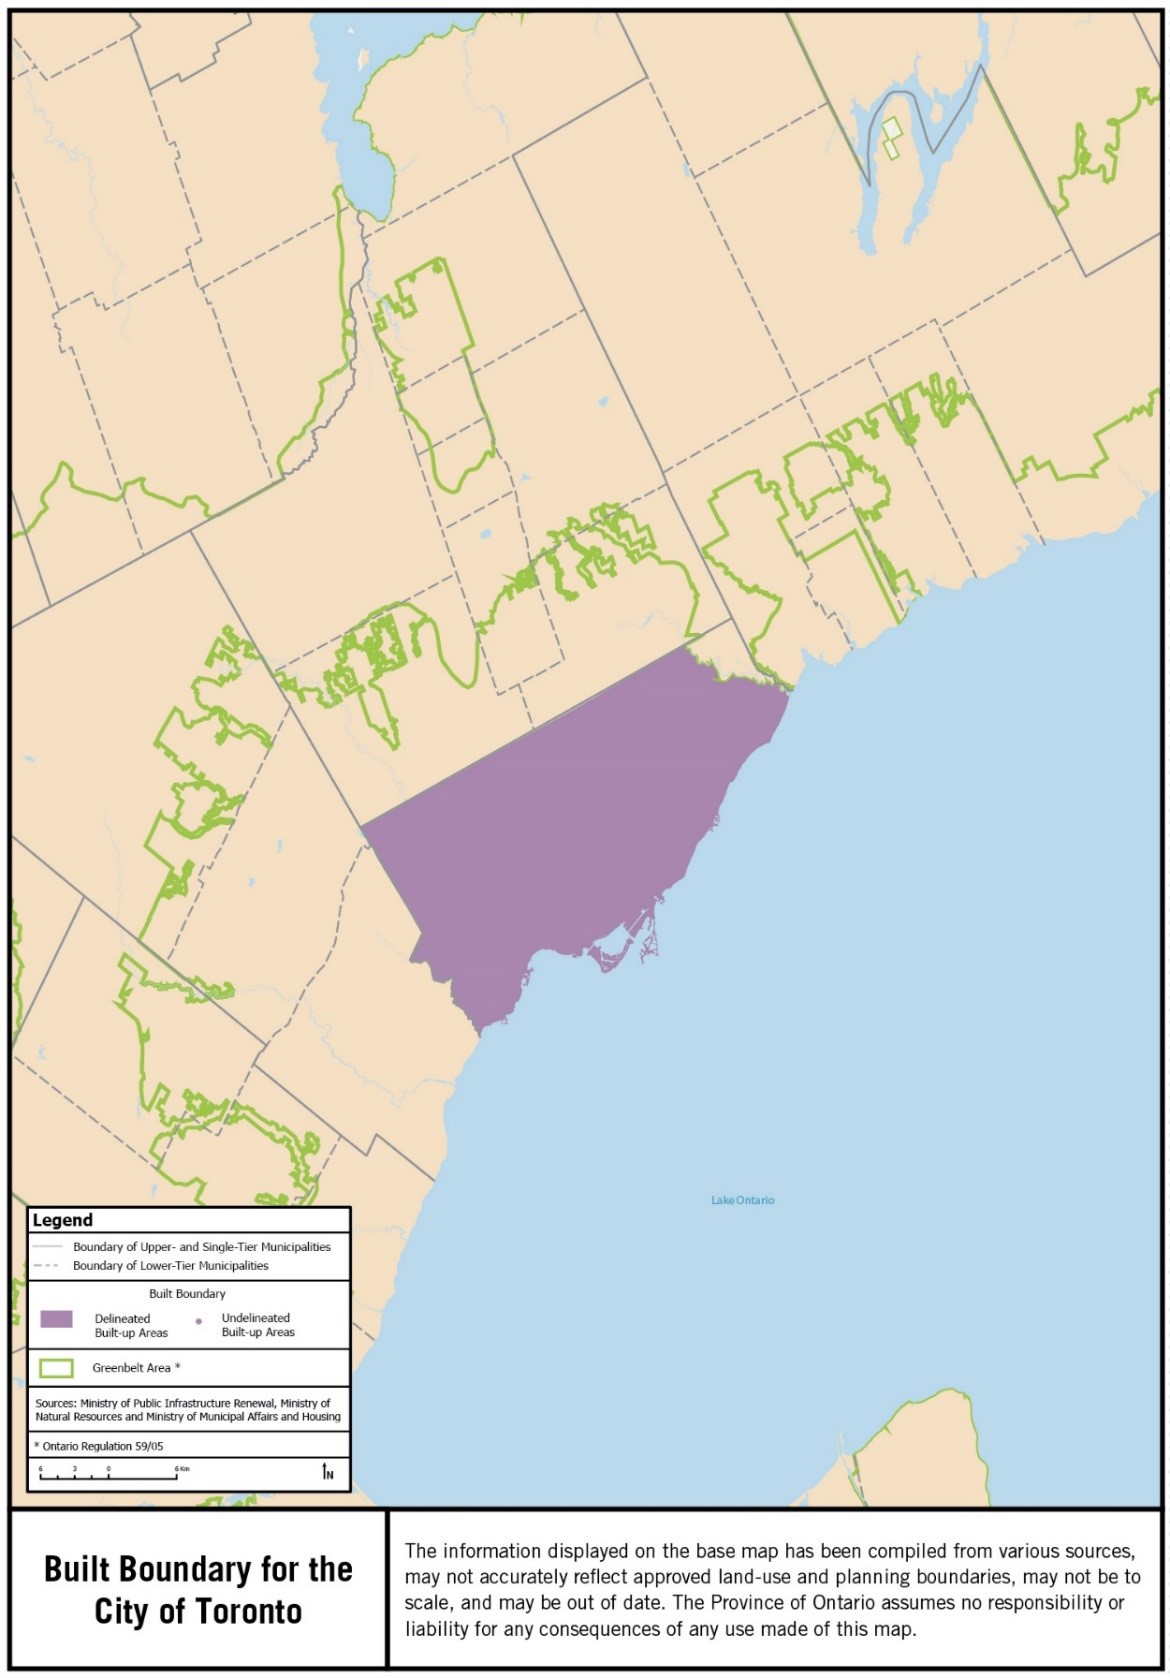 Map showing the built boundary for the City of Toronto.